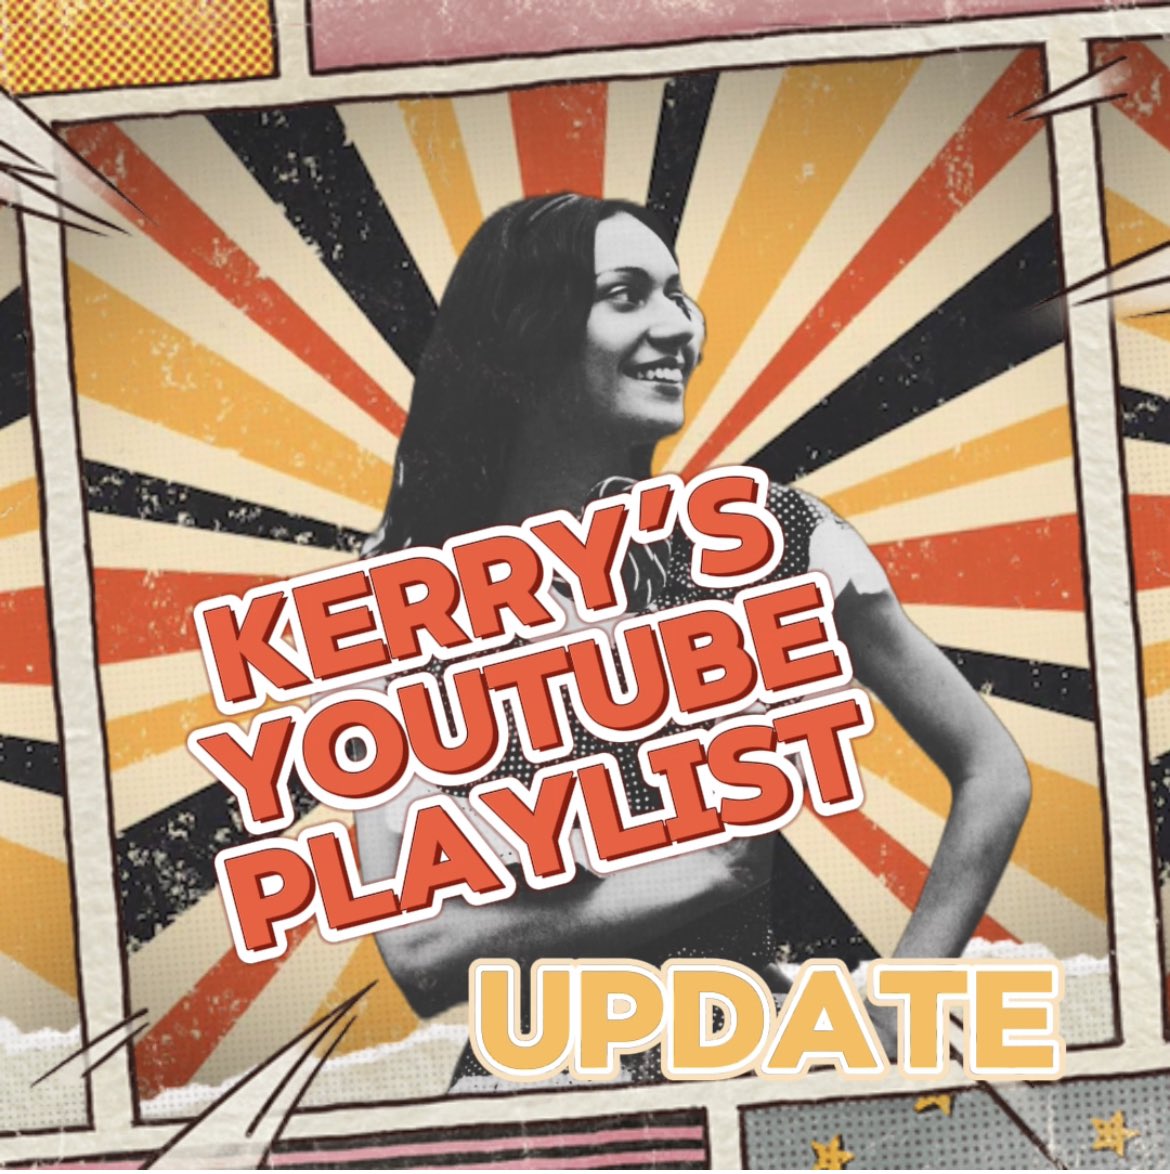 Who wanna join my “KERRY’s YouTube Indie Family” playlist? ❤️ 🪩Follow me! 🪩 Explore the playlist! 🪩 Drop your fire music videos! youtube.com/playlist?list=… Let's support each other! ❤️❤️‍🩹❤️ #playlist #playlistcurator #indiemusic #indiemusician #indiemusicians #musicvideo